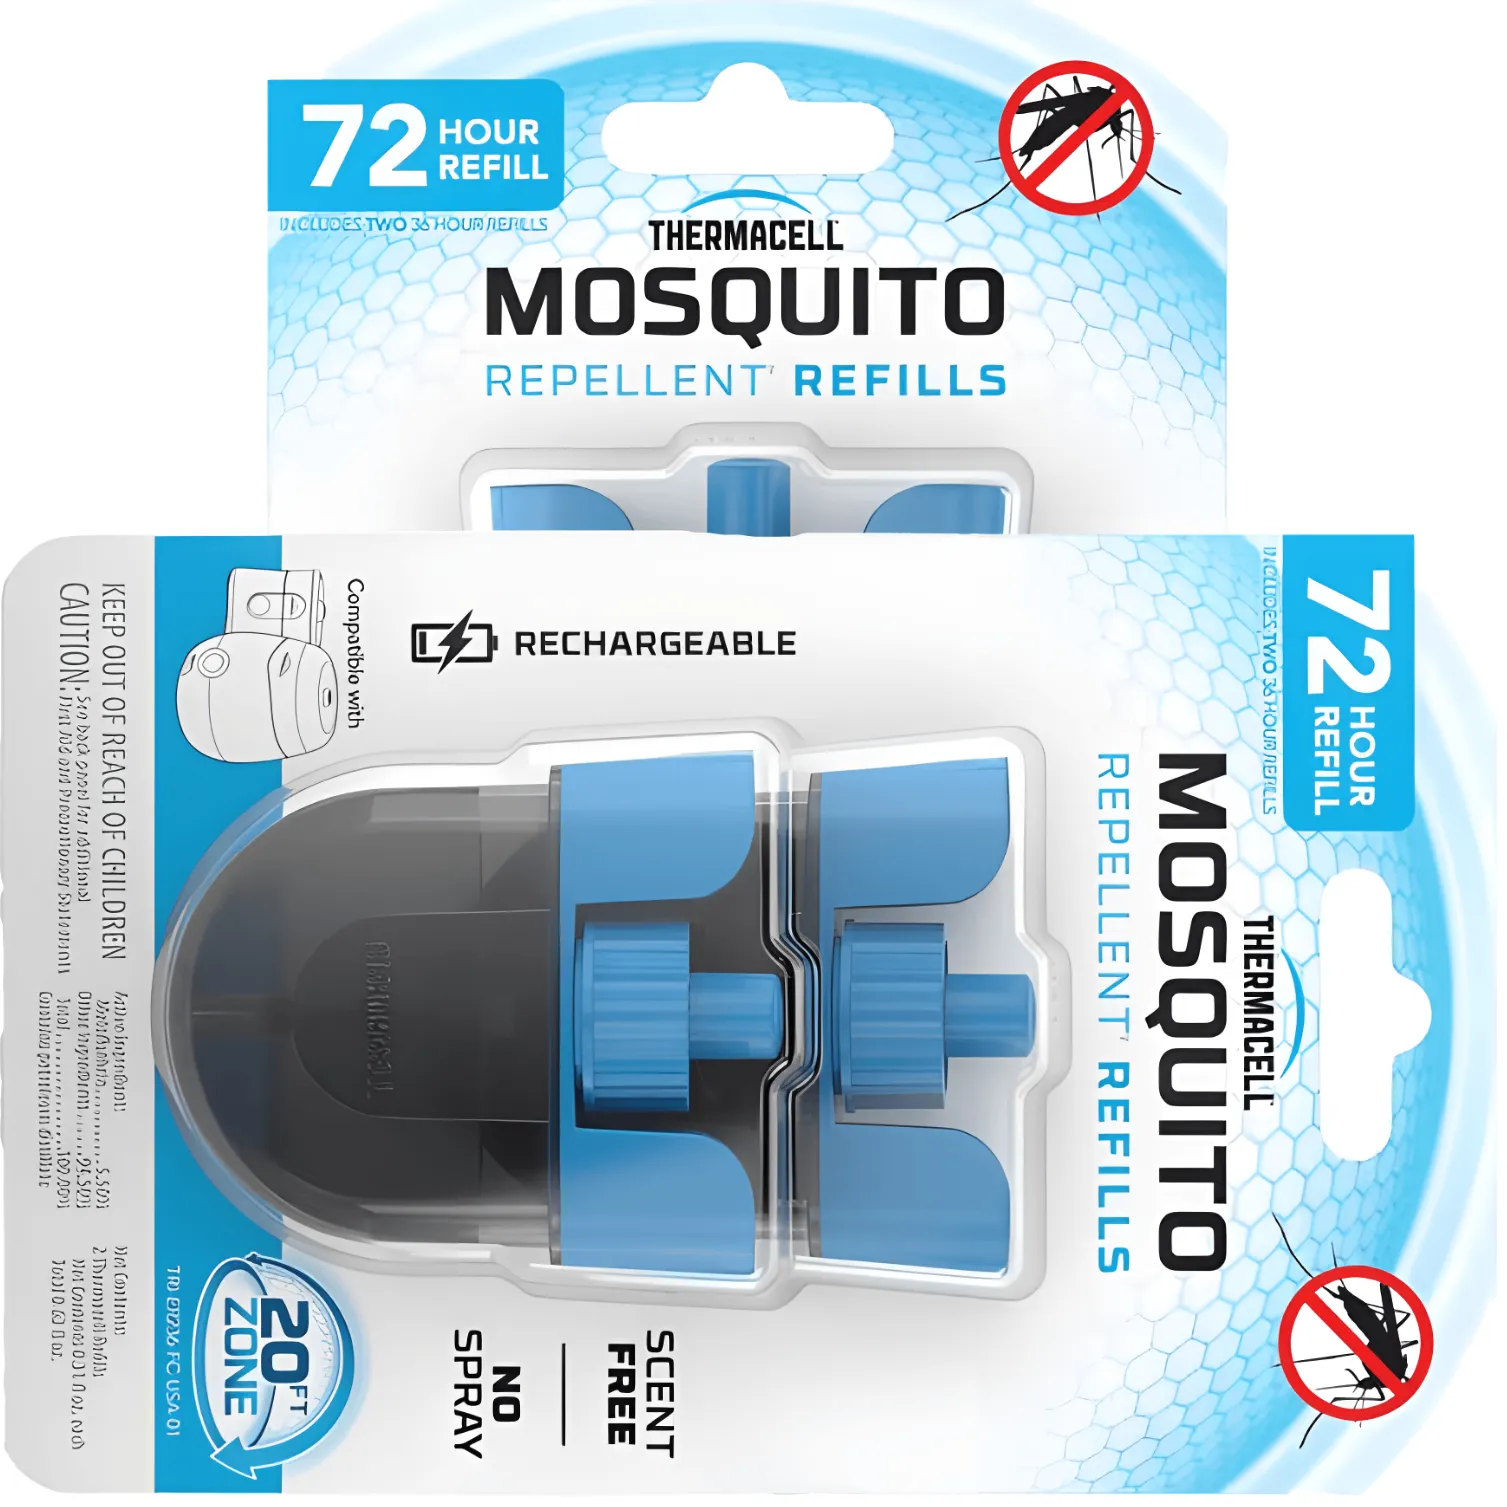 Free Thermacell Mosquito Repellent Solutions